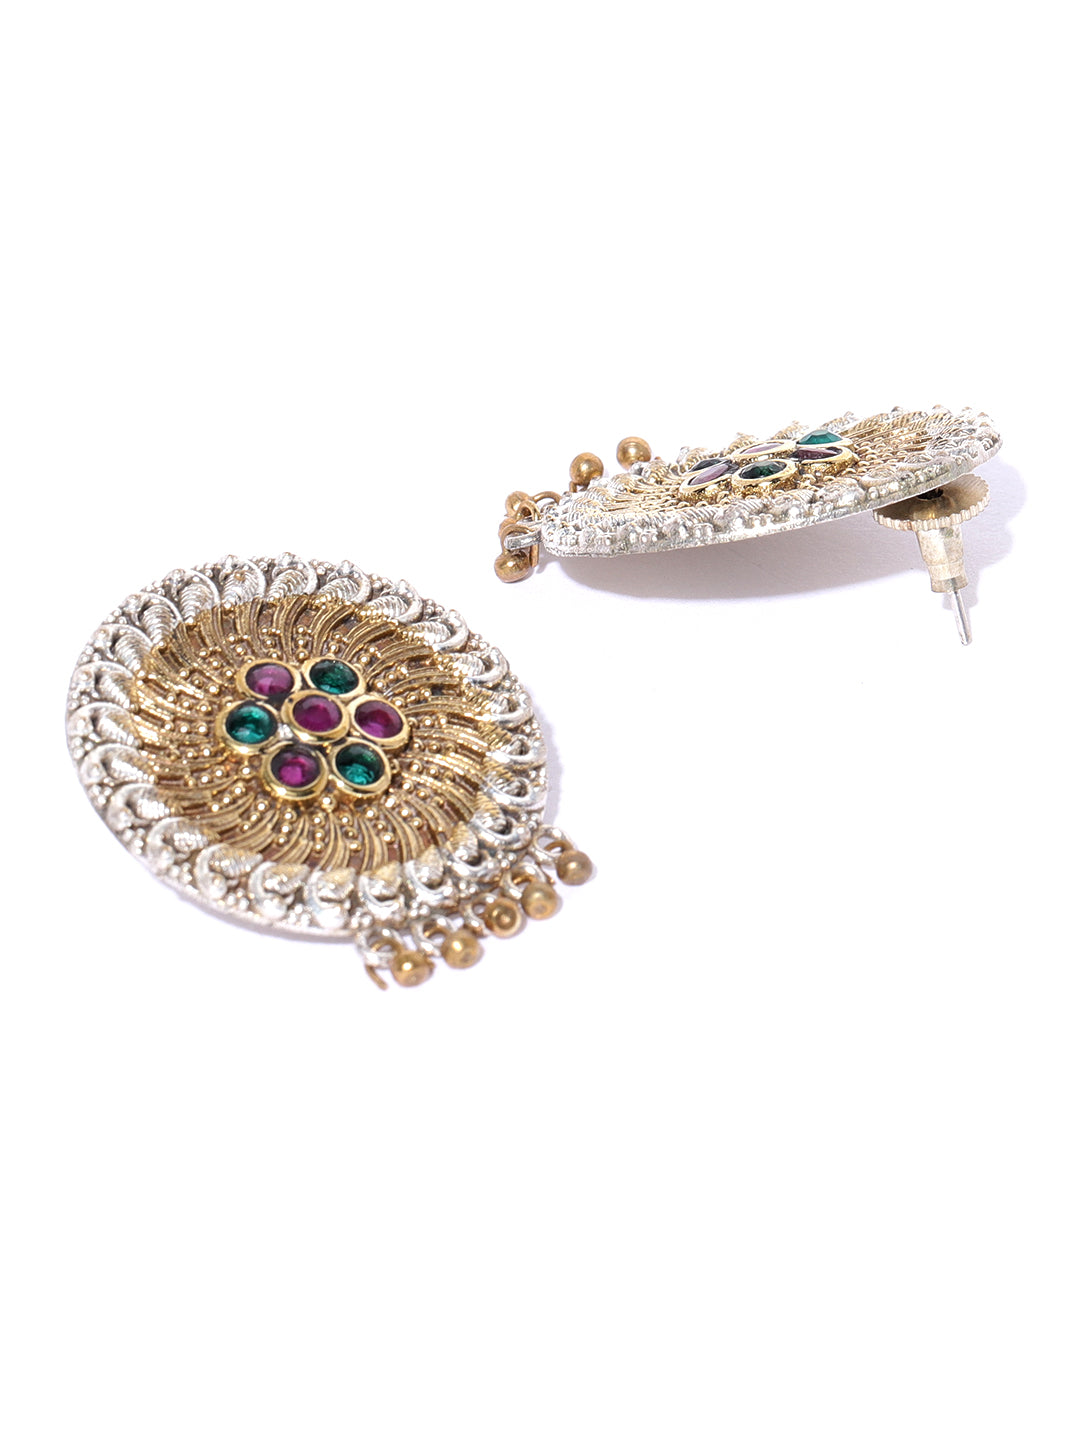 Oxidized Dual-Toned Magenta and Green Stones Studded Drop Earrings in Floral Pattern